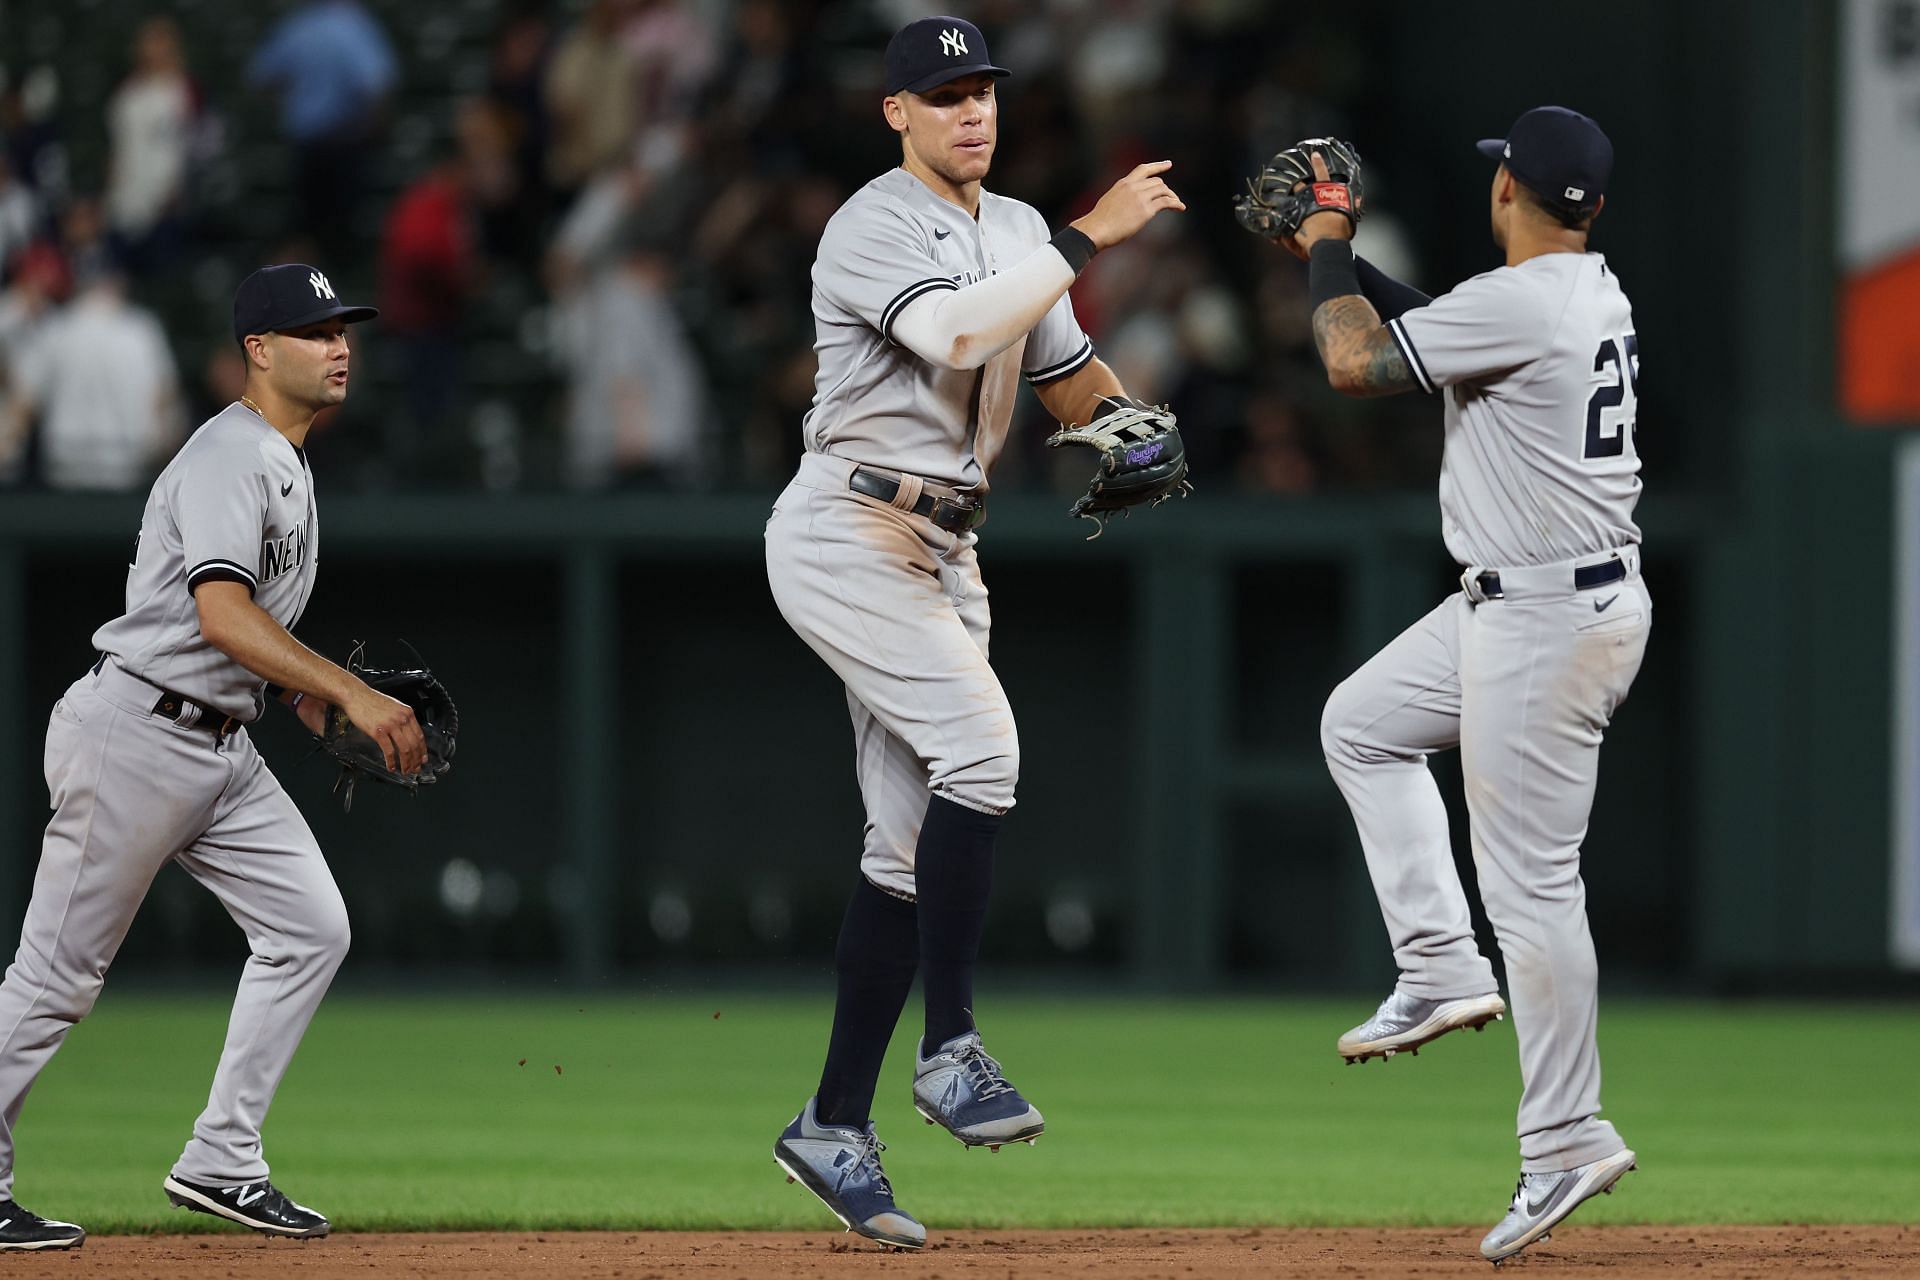 The New York Yankees face the Baltimore Orioles Wednesday.